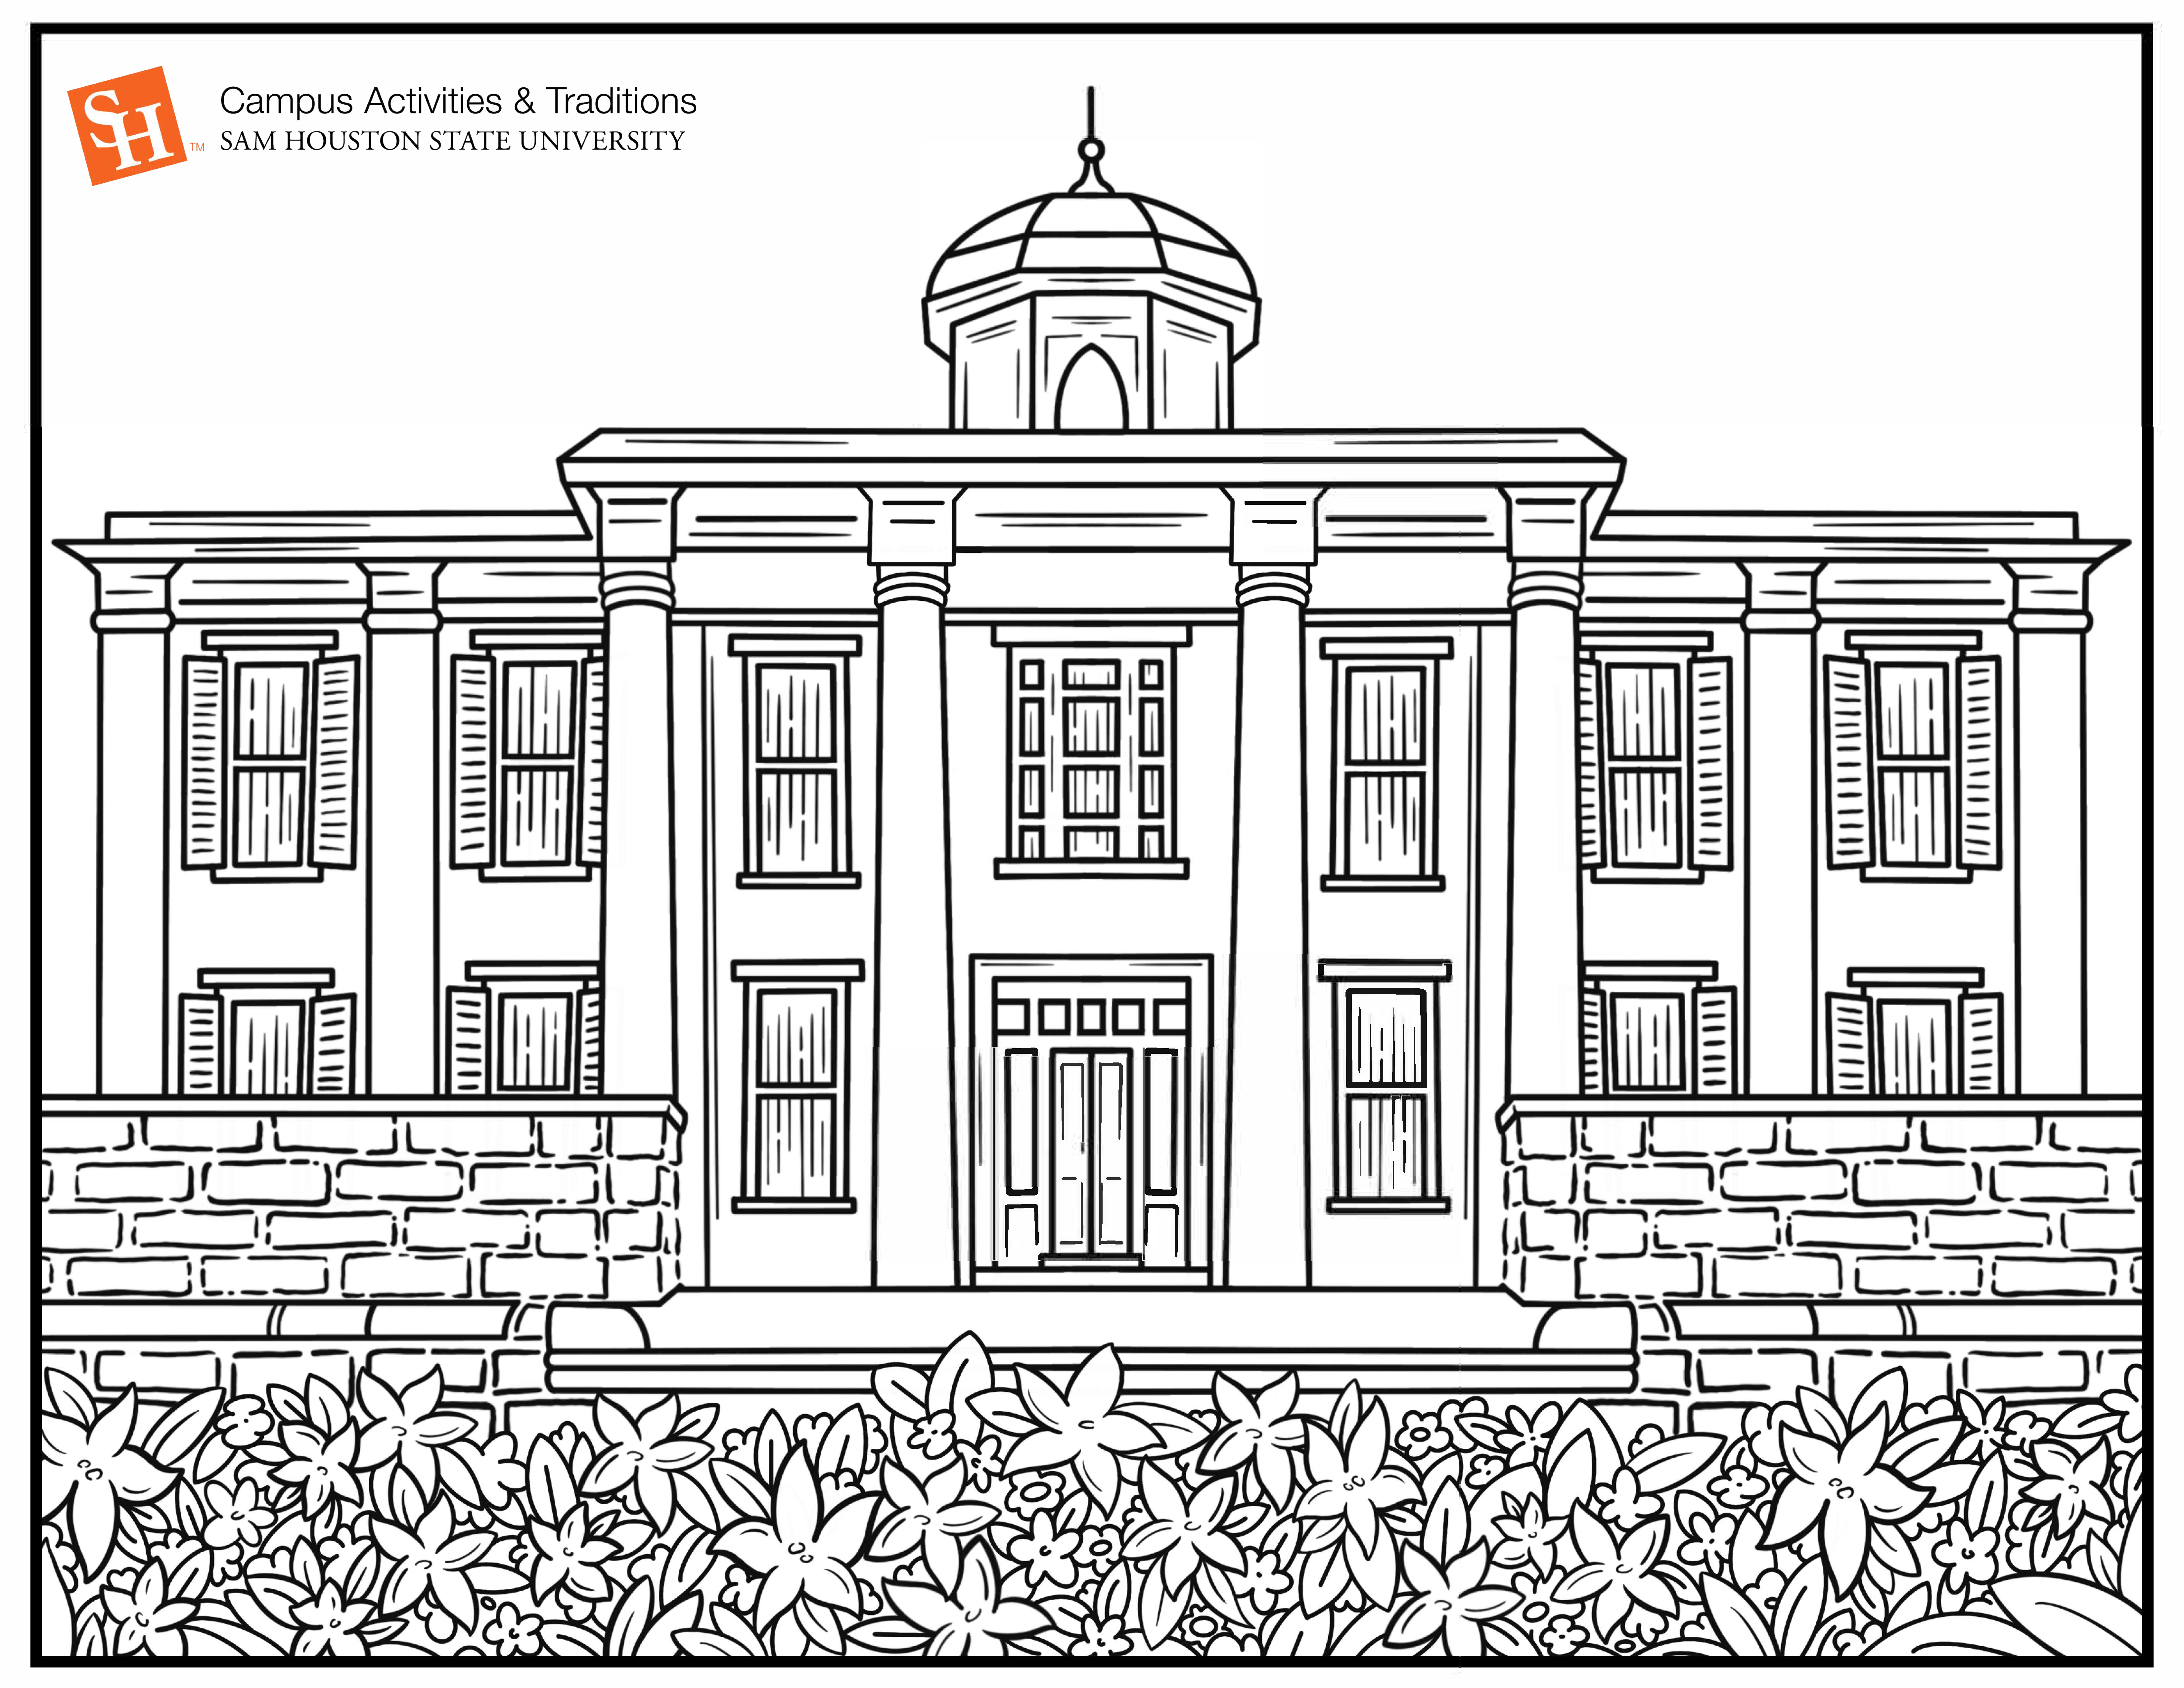 Student Activities Coloring Sheets_Page_4.png